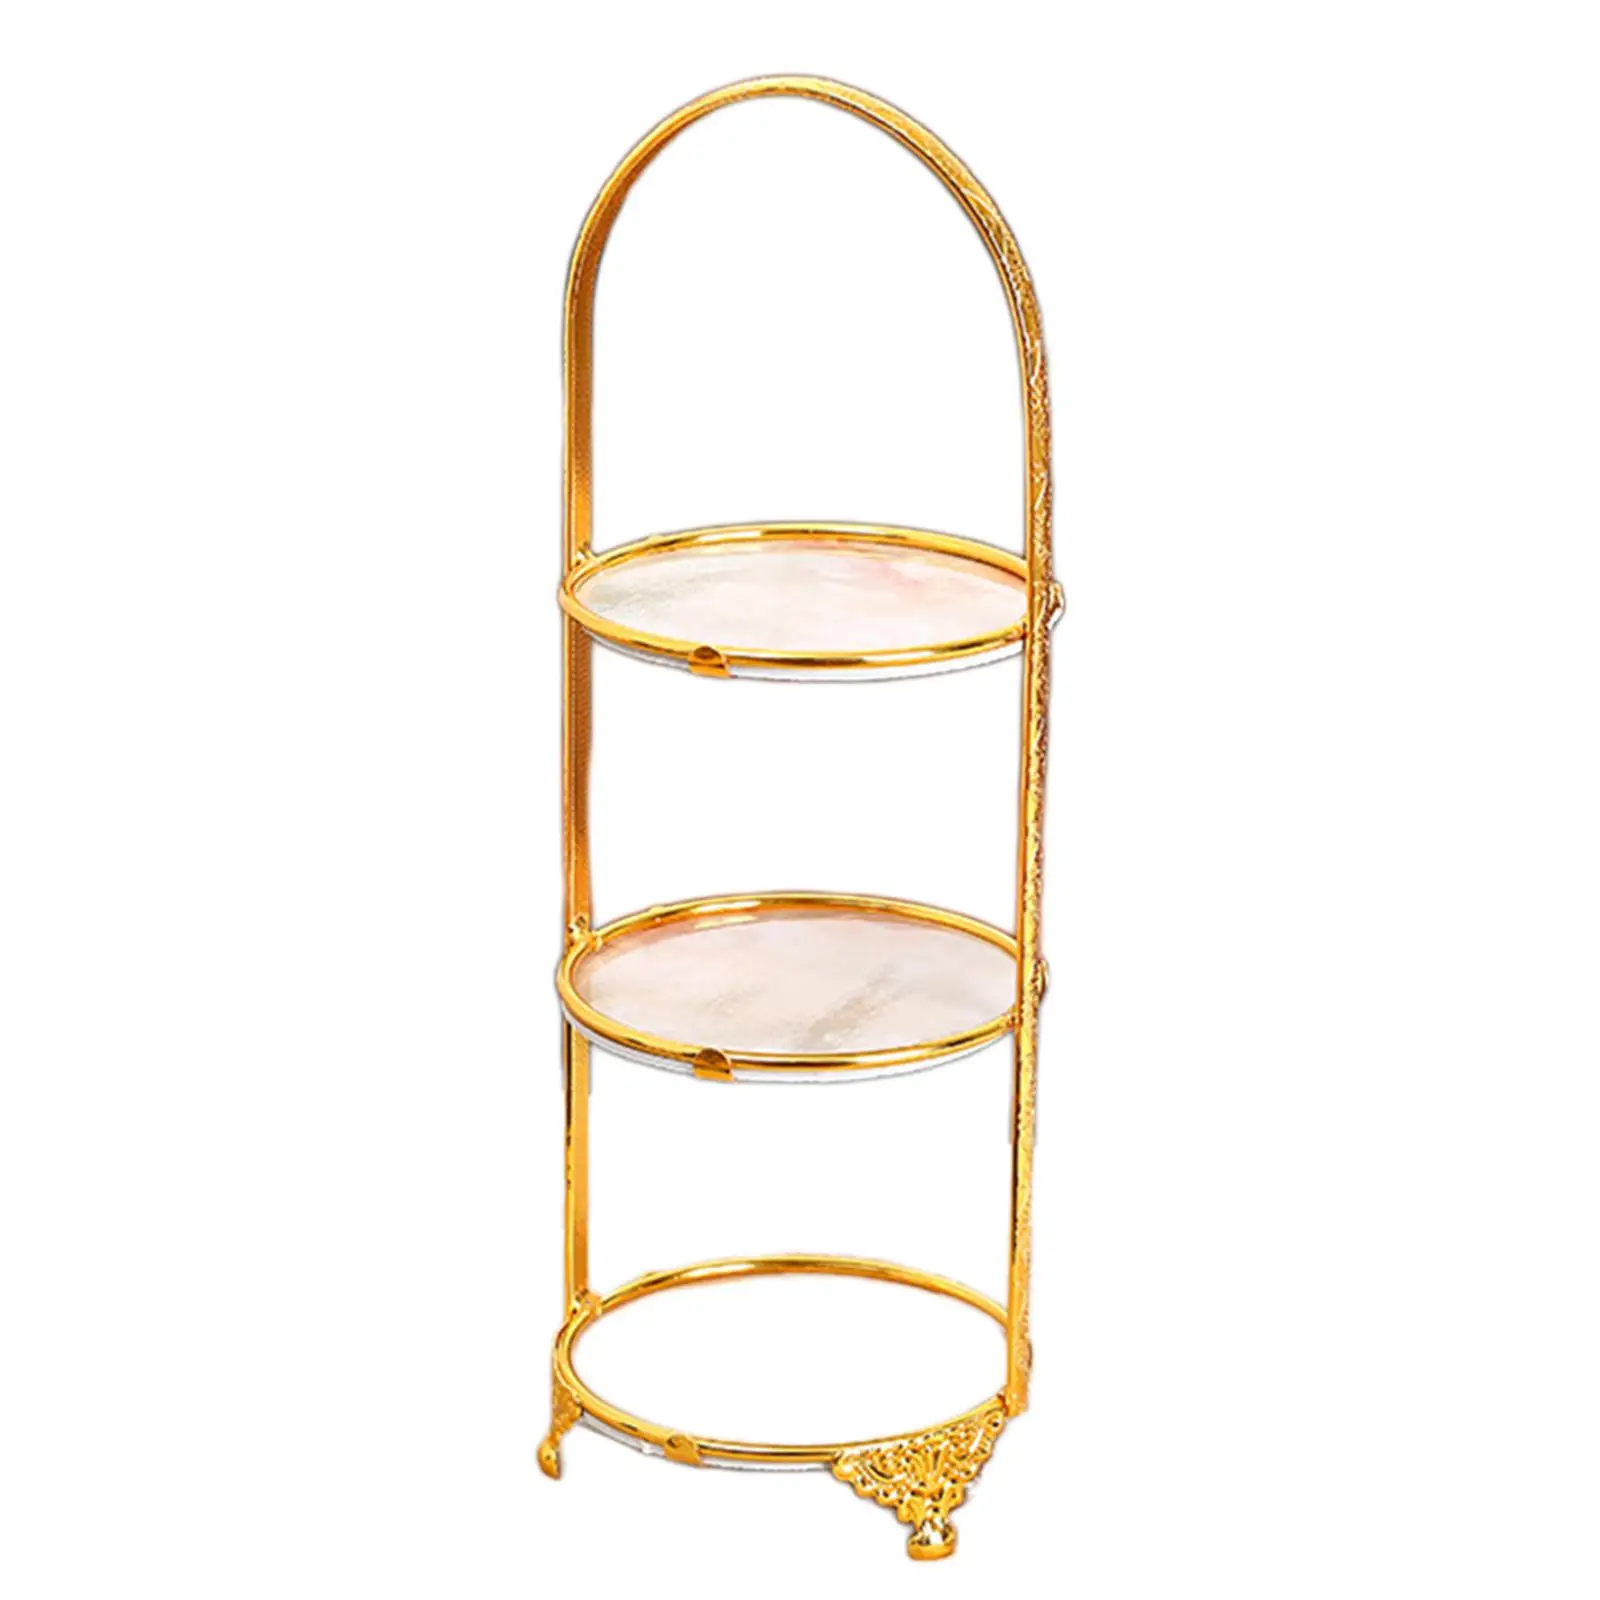 Iron Cake Stand Decor Serving Tray Antique Display Stand Cupcake Holder for Banquet Afternoon Tea Pastry Cookies Candy